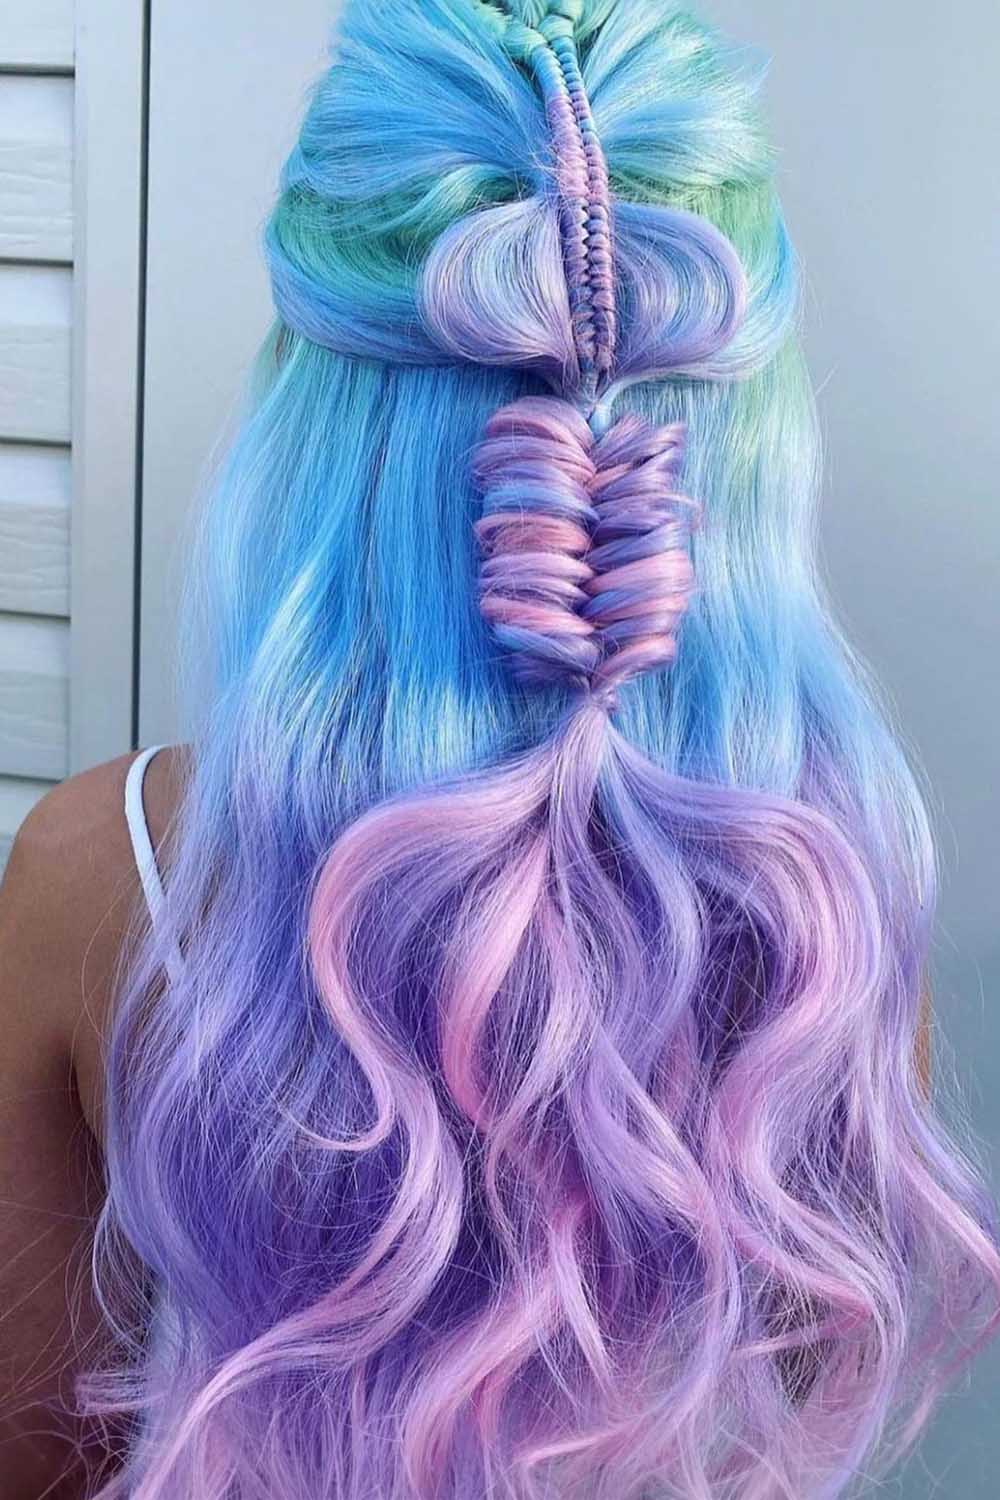 Braided Blue and Violet Long Hair